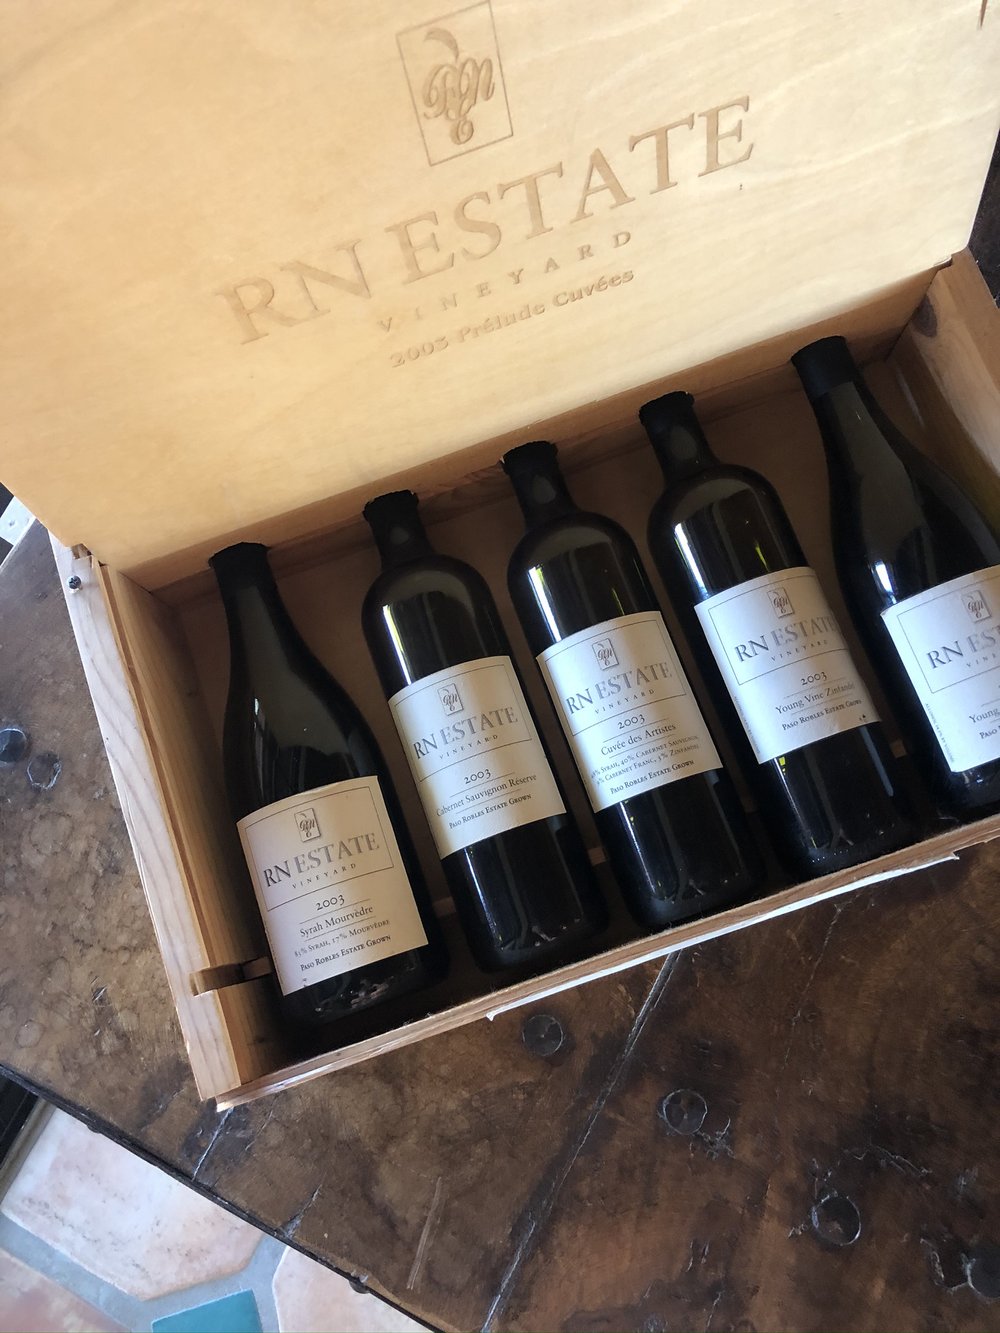 RN-Estate-Winery-Paso-Robles.jpeg